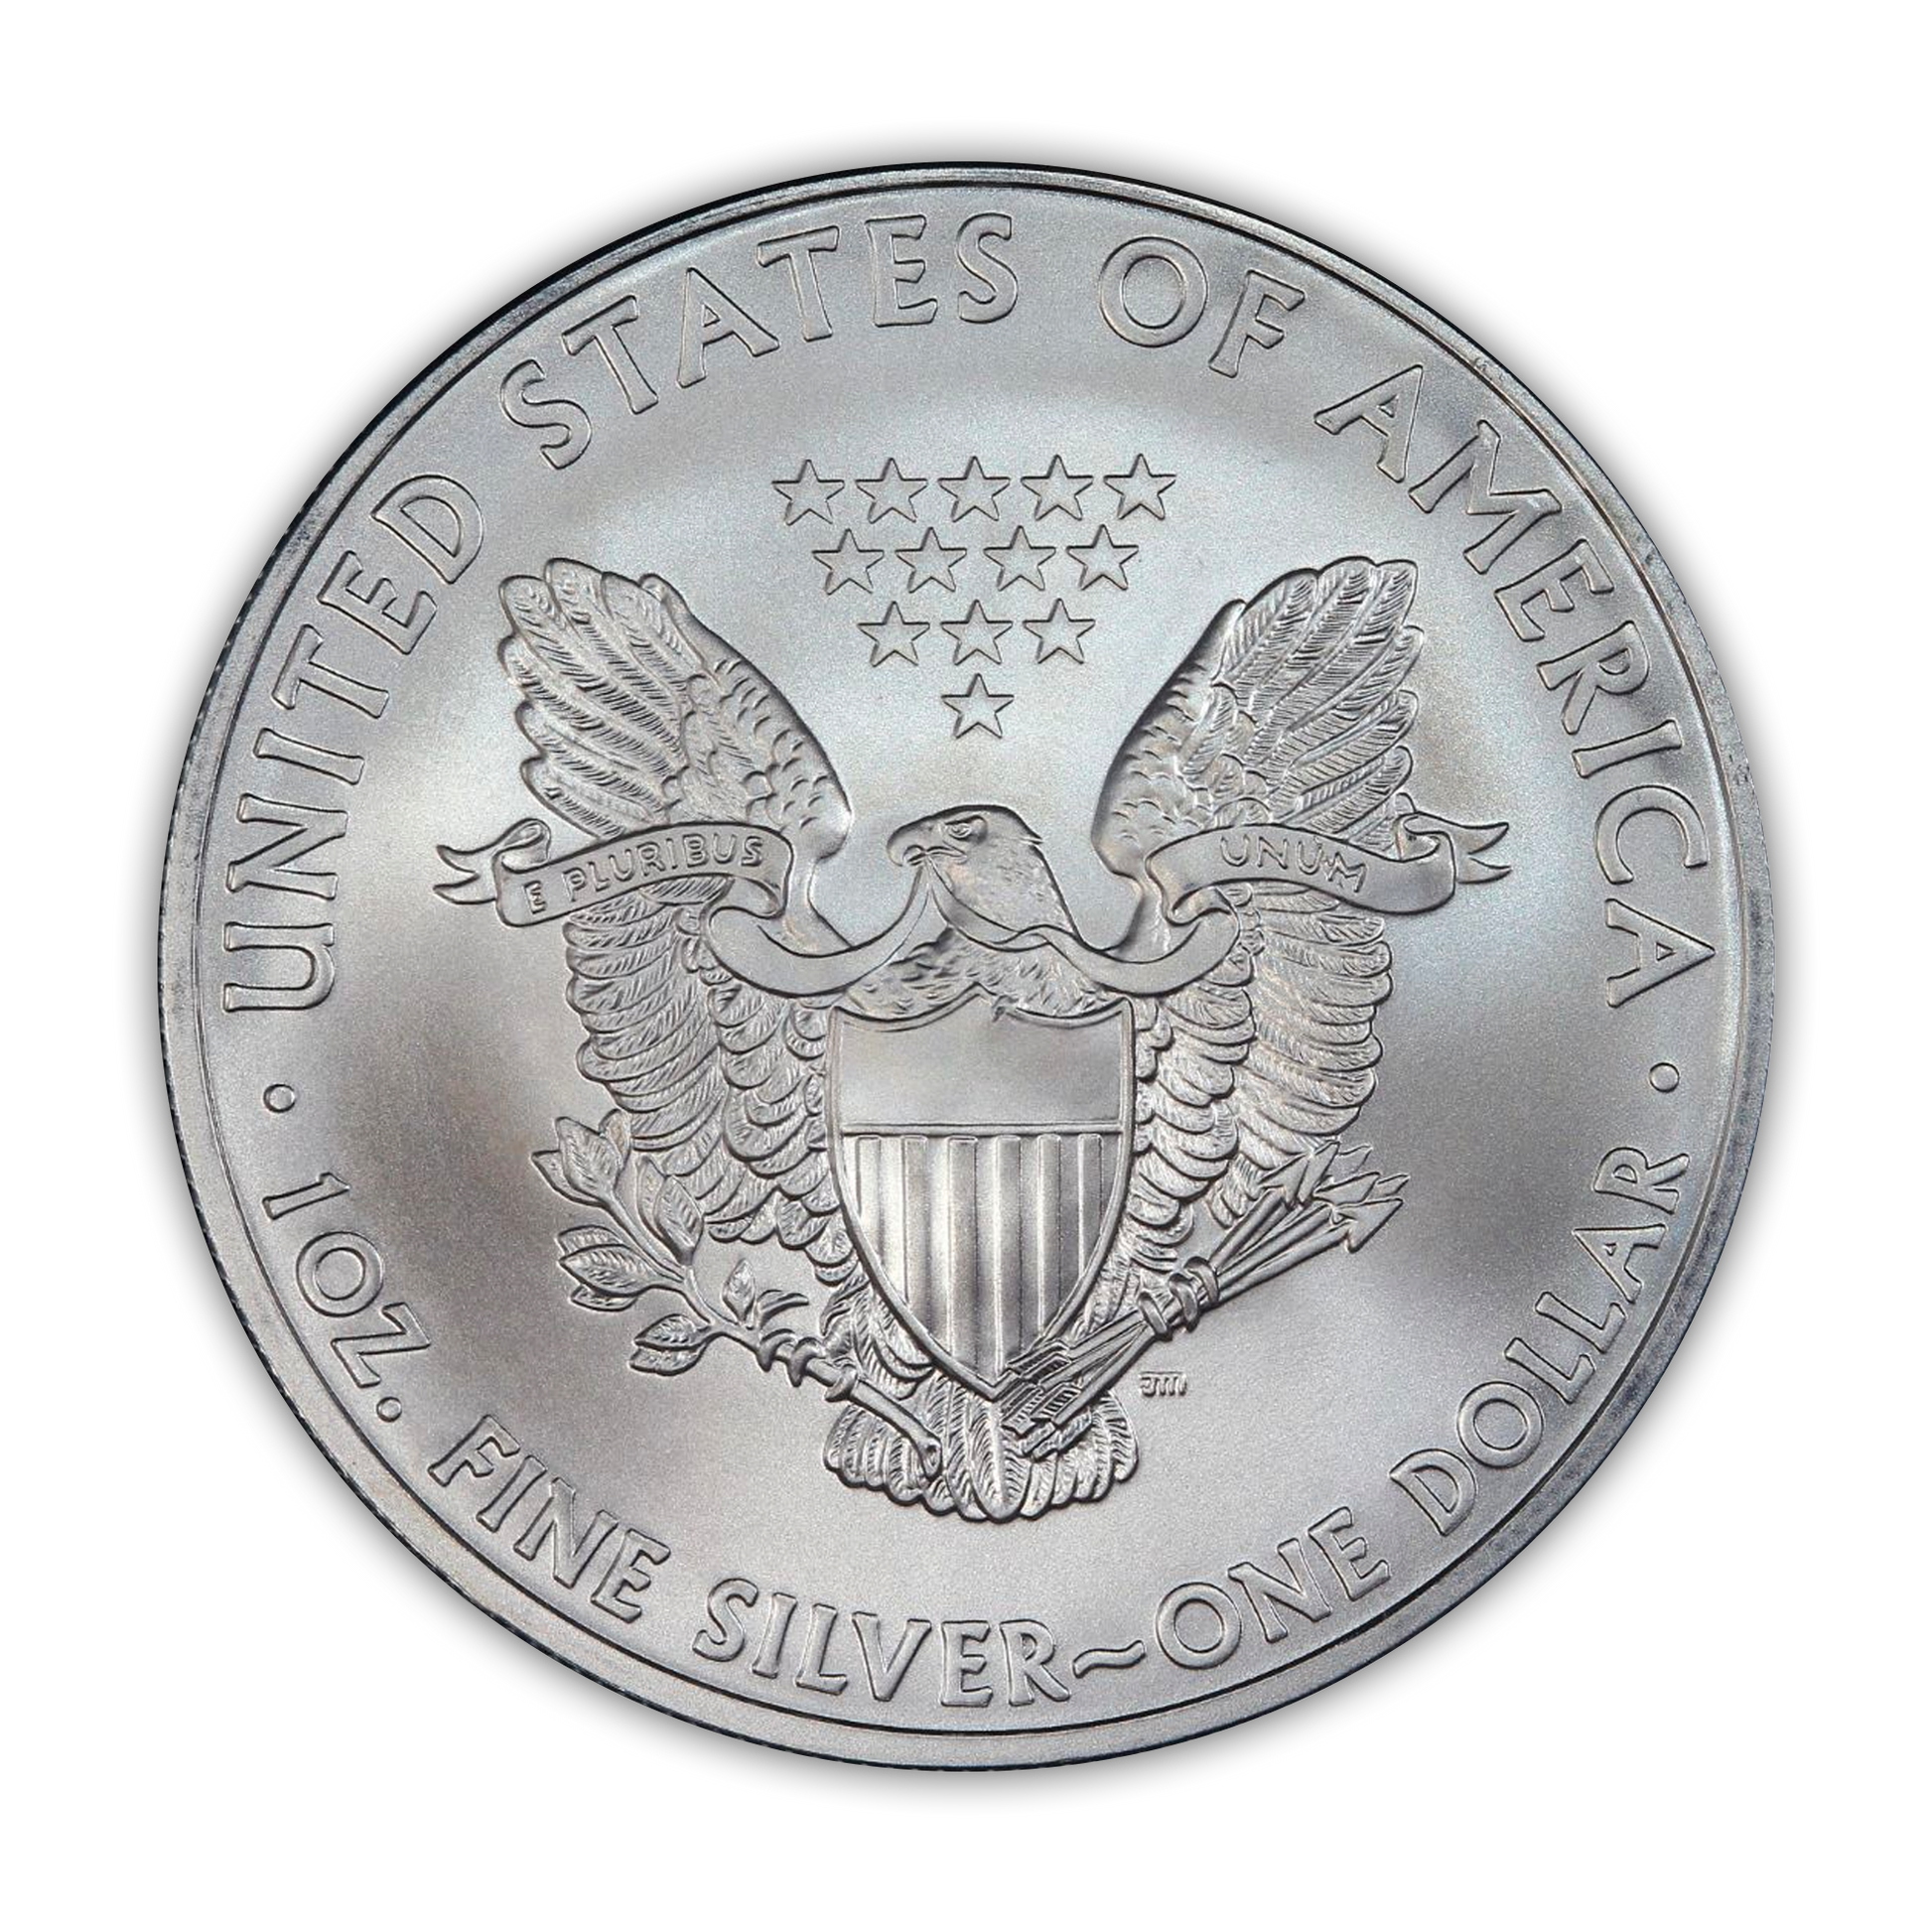 2010 Silver Eagle - Business Strike - Uncirculated - CoinsTV